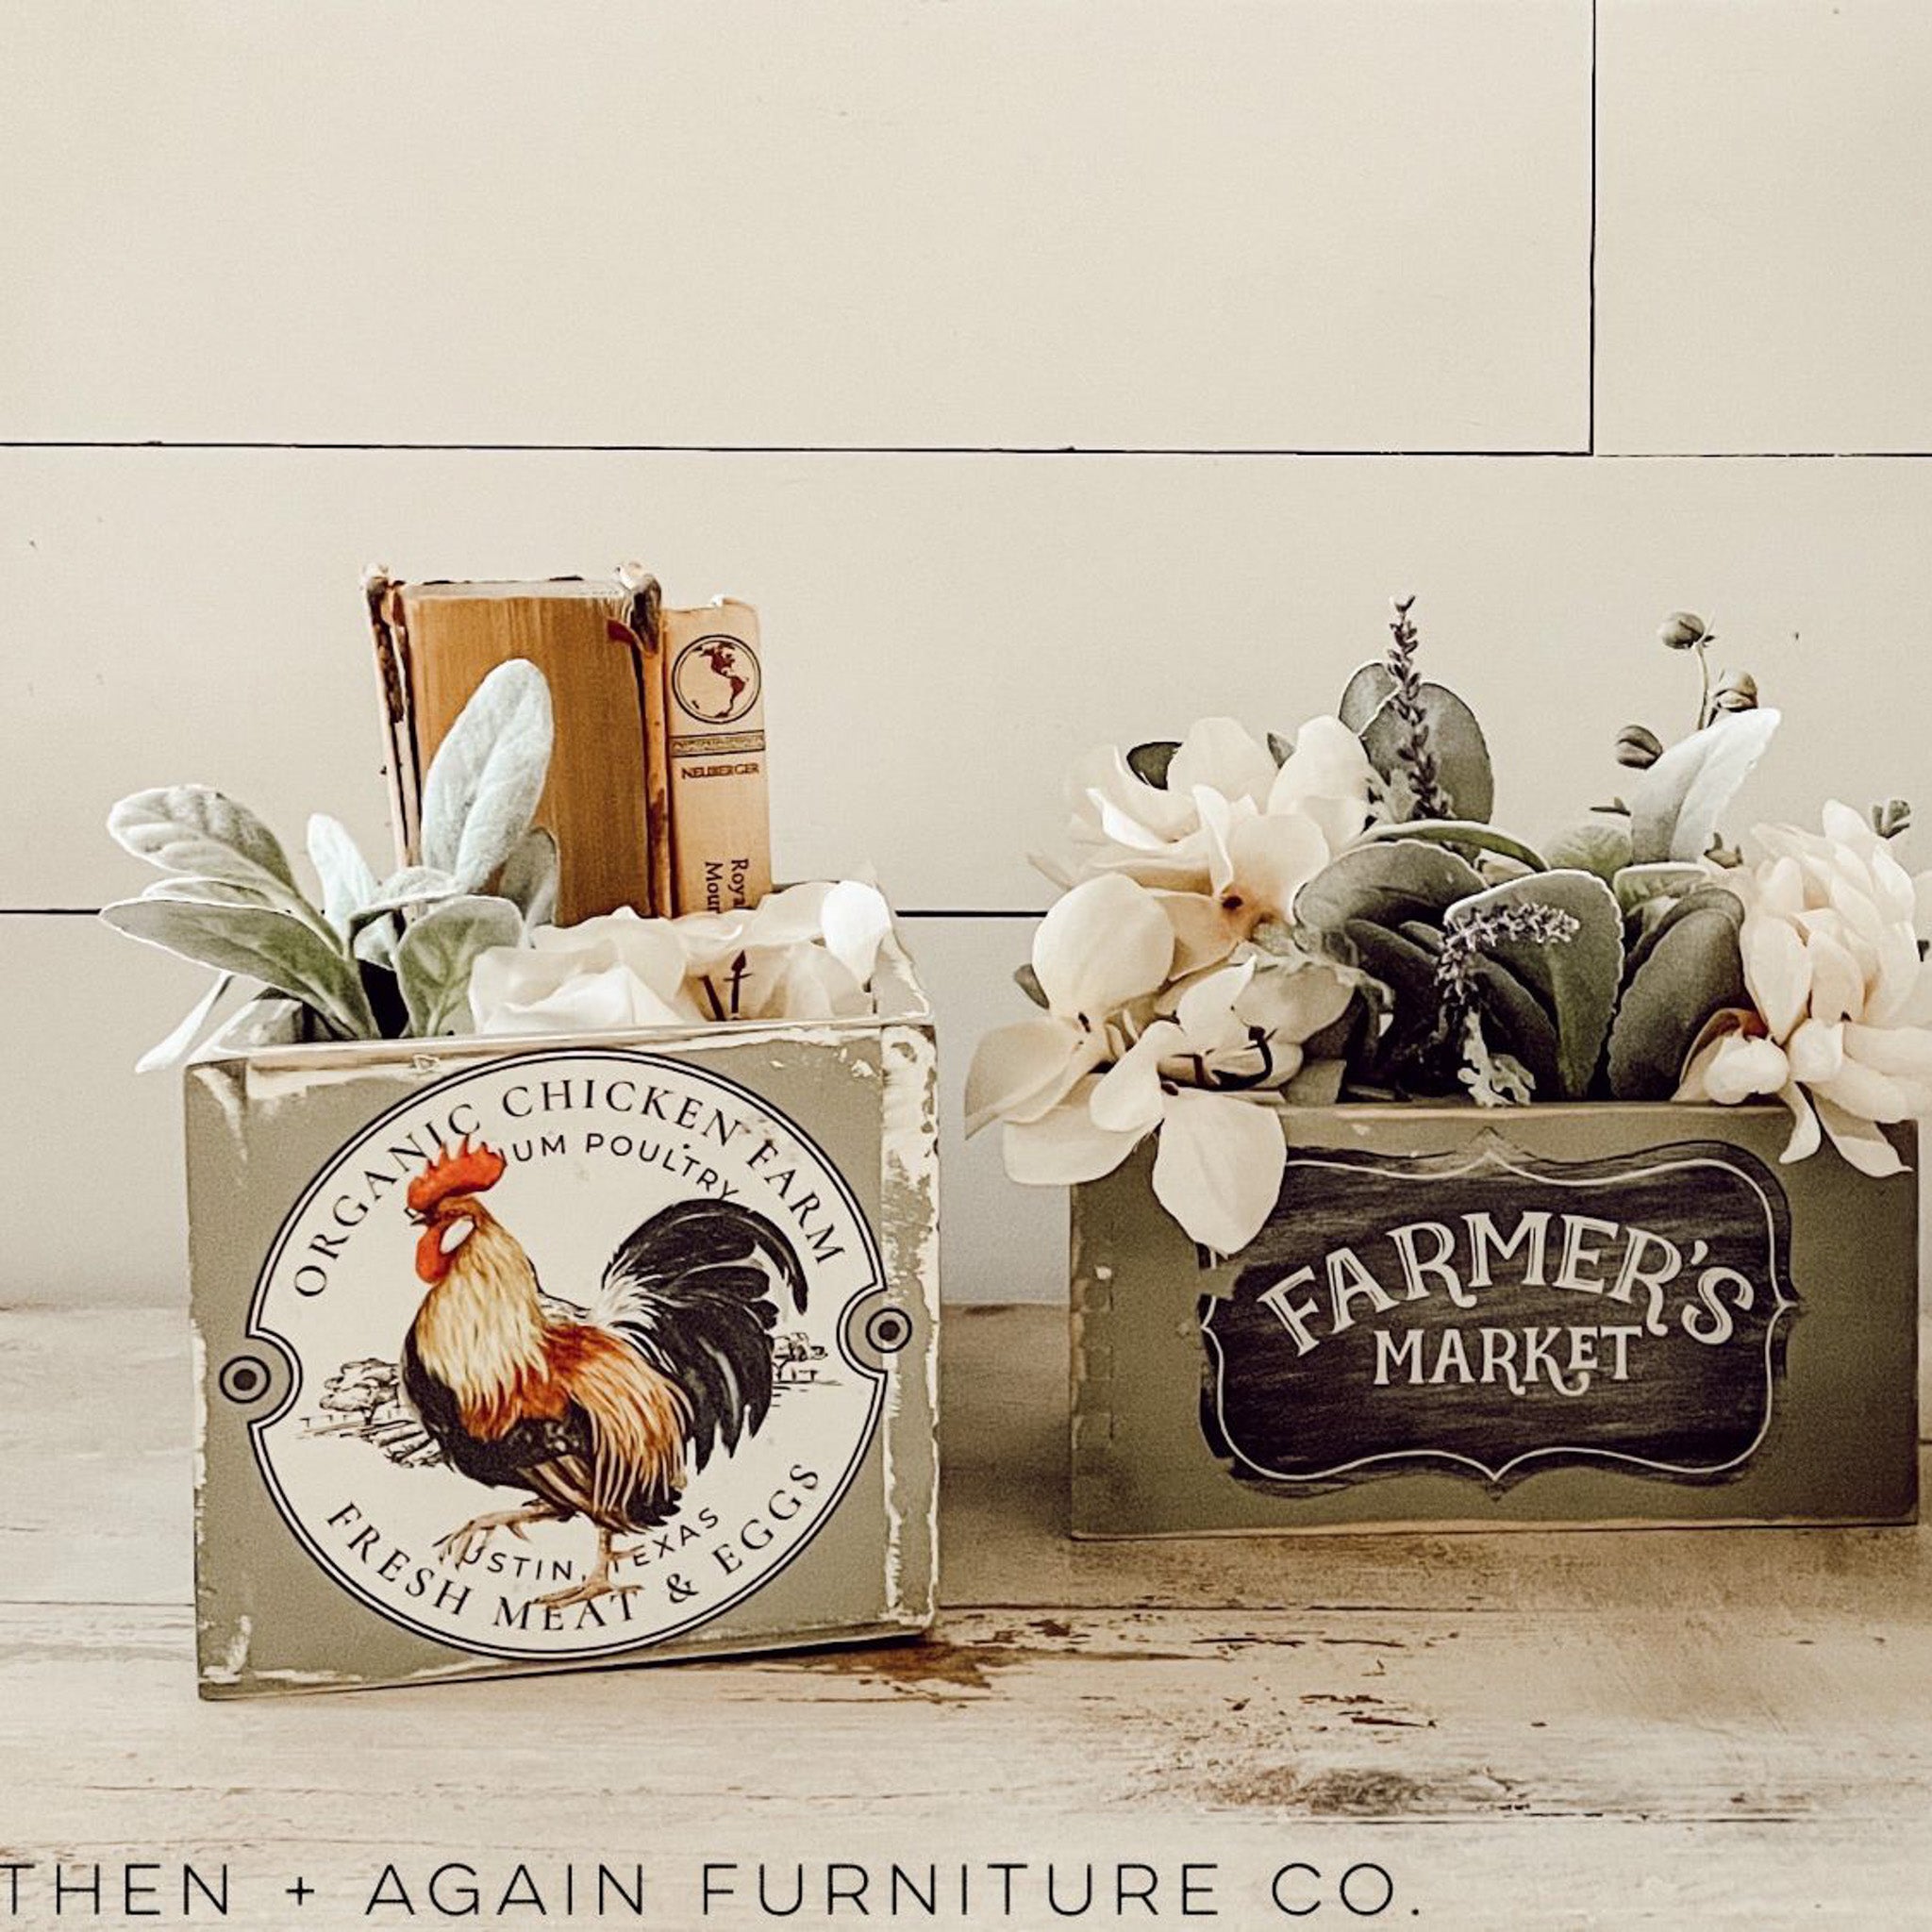 Two wood boxes made into flower containers refurbished by Then + Again Furniture Co. are painted soft greens and feature ReDesign with Prima's Morning Farmhouse small transfer on them.